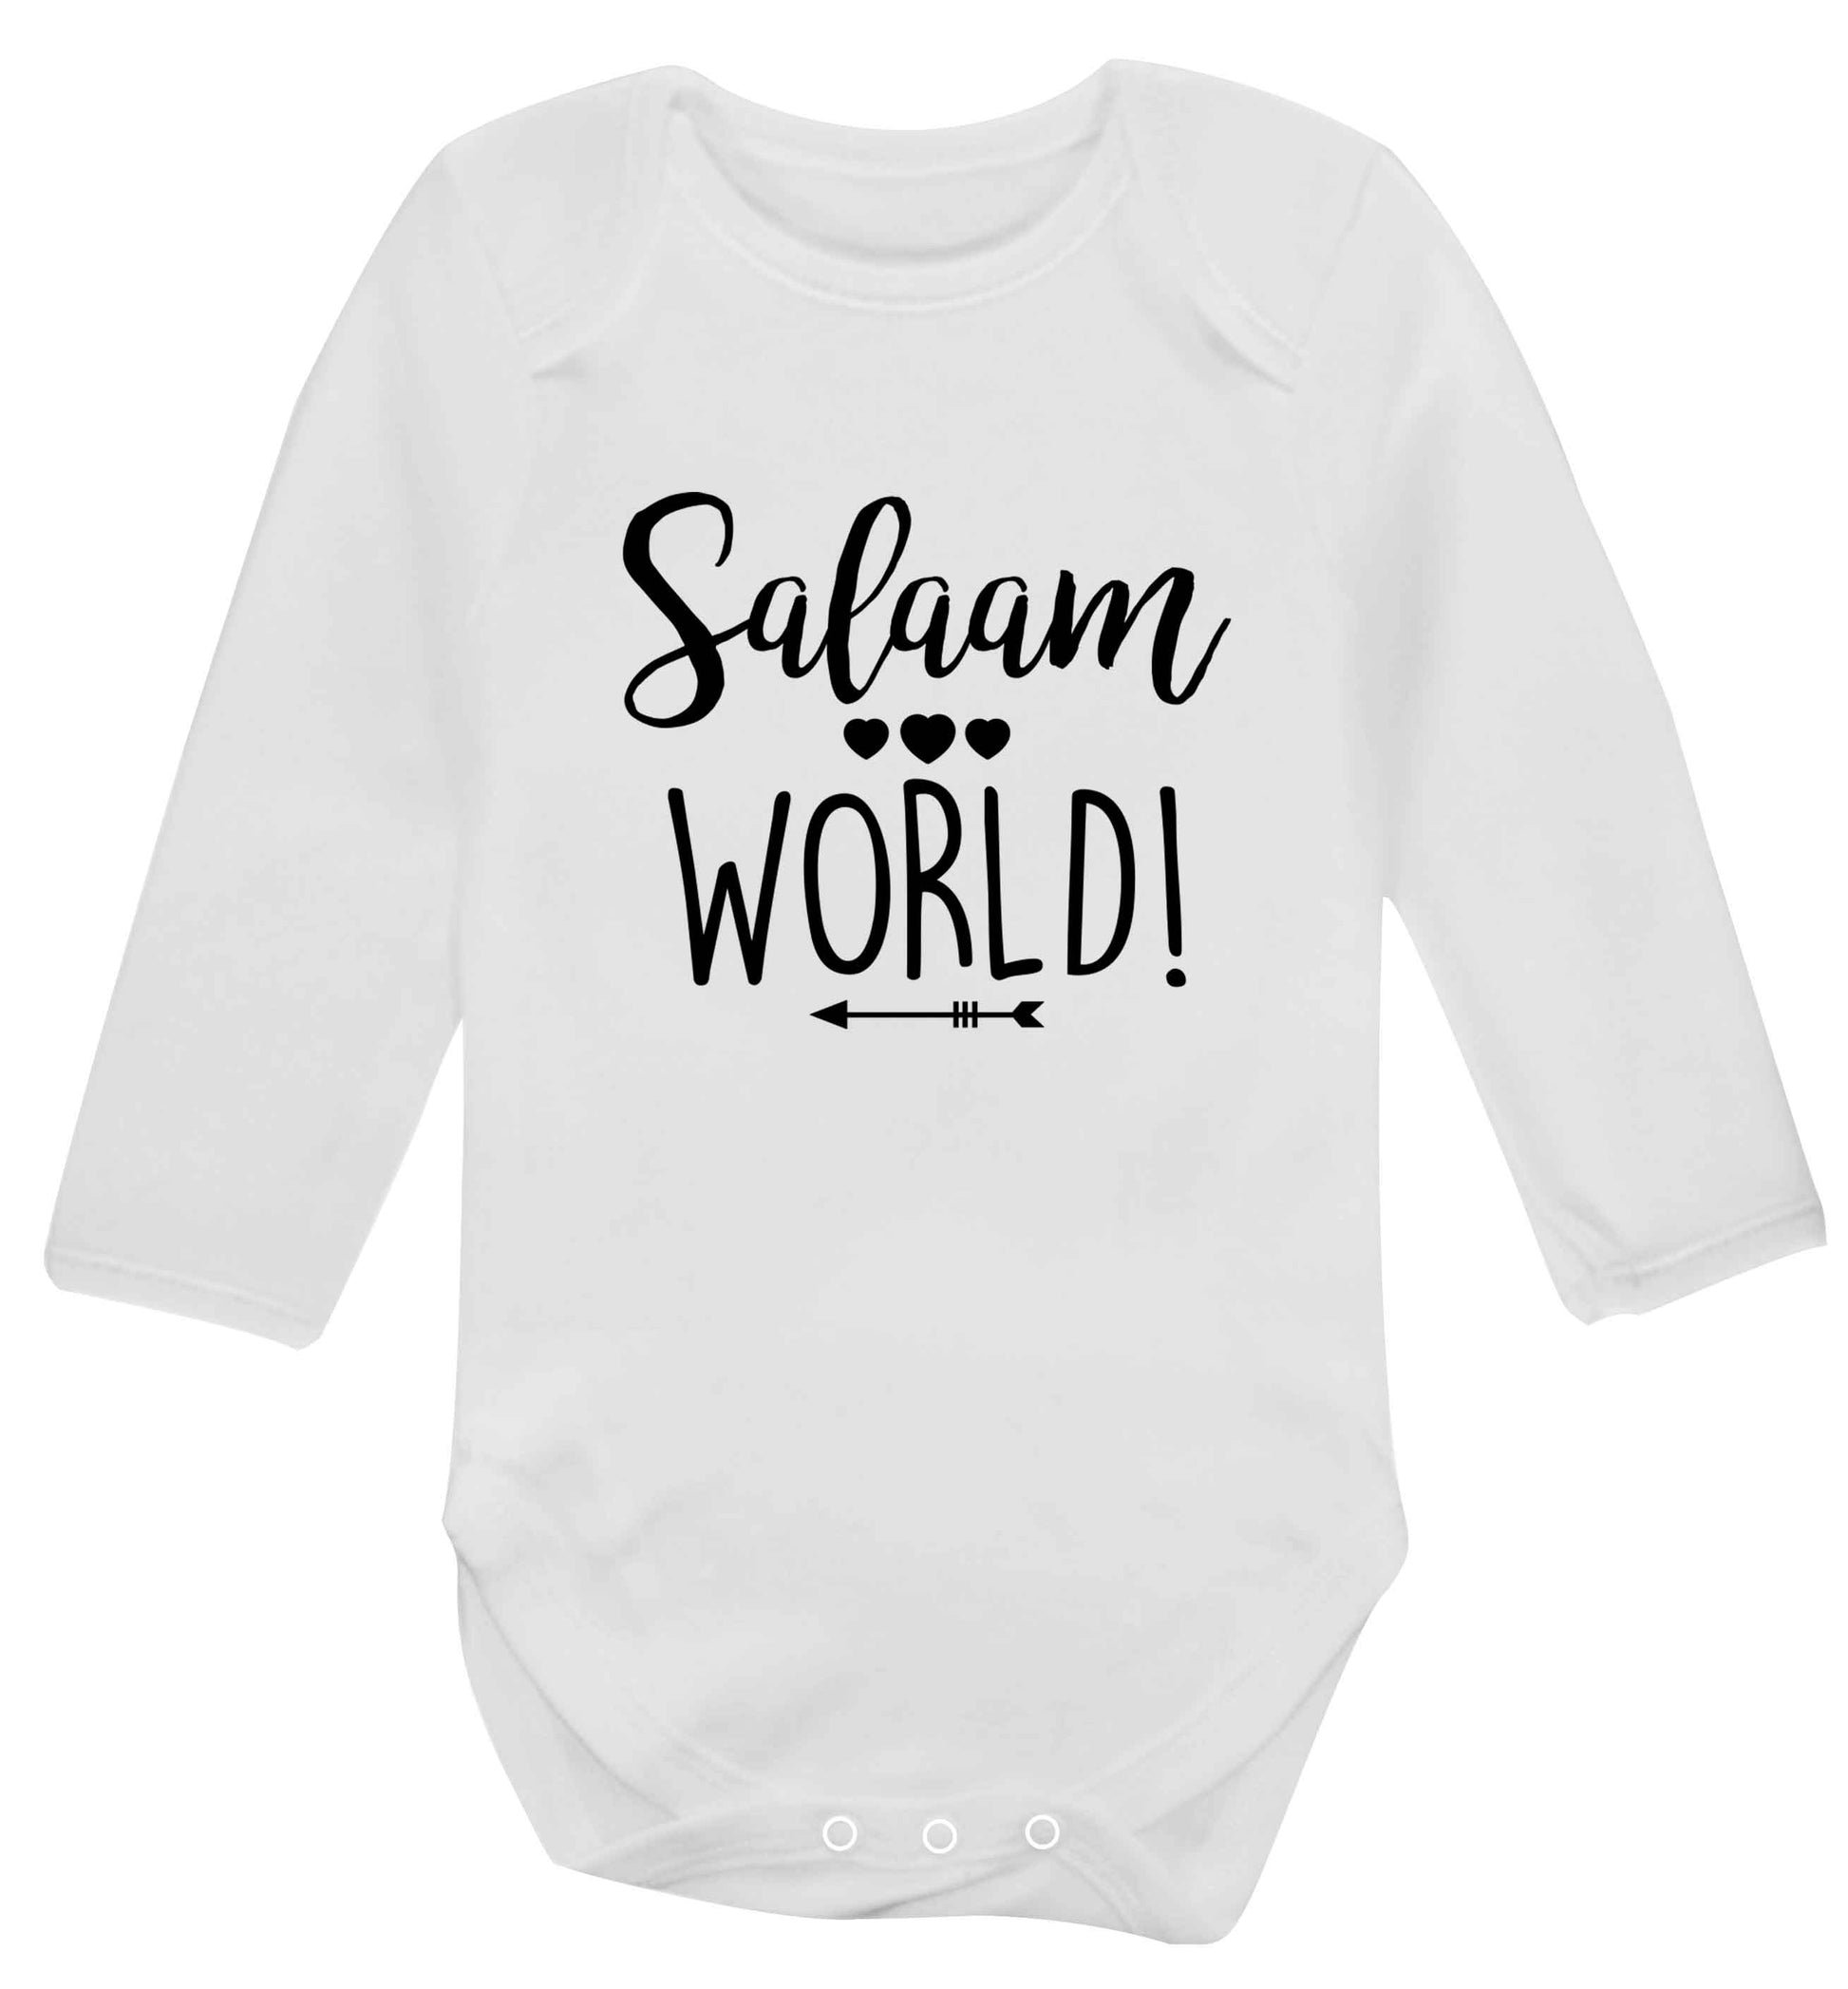 Salaam world baby vest long sleeved white 6-12 months